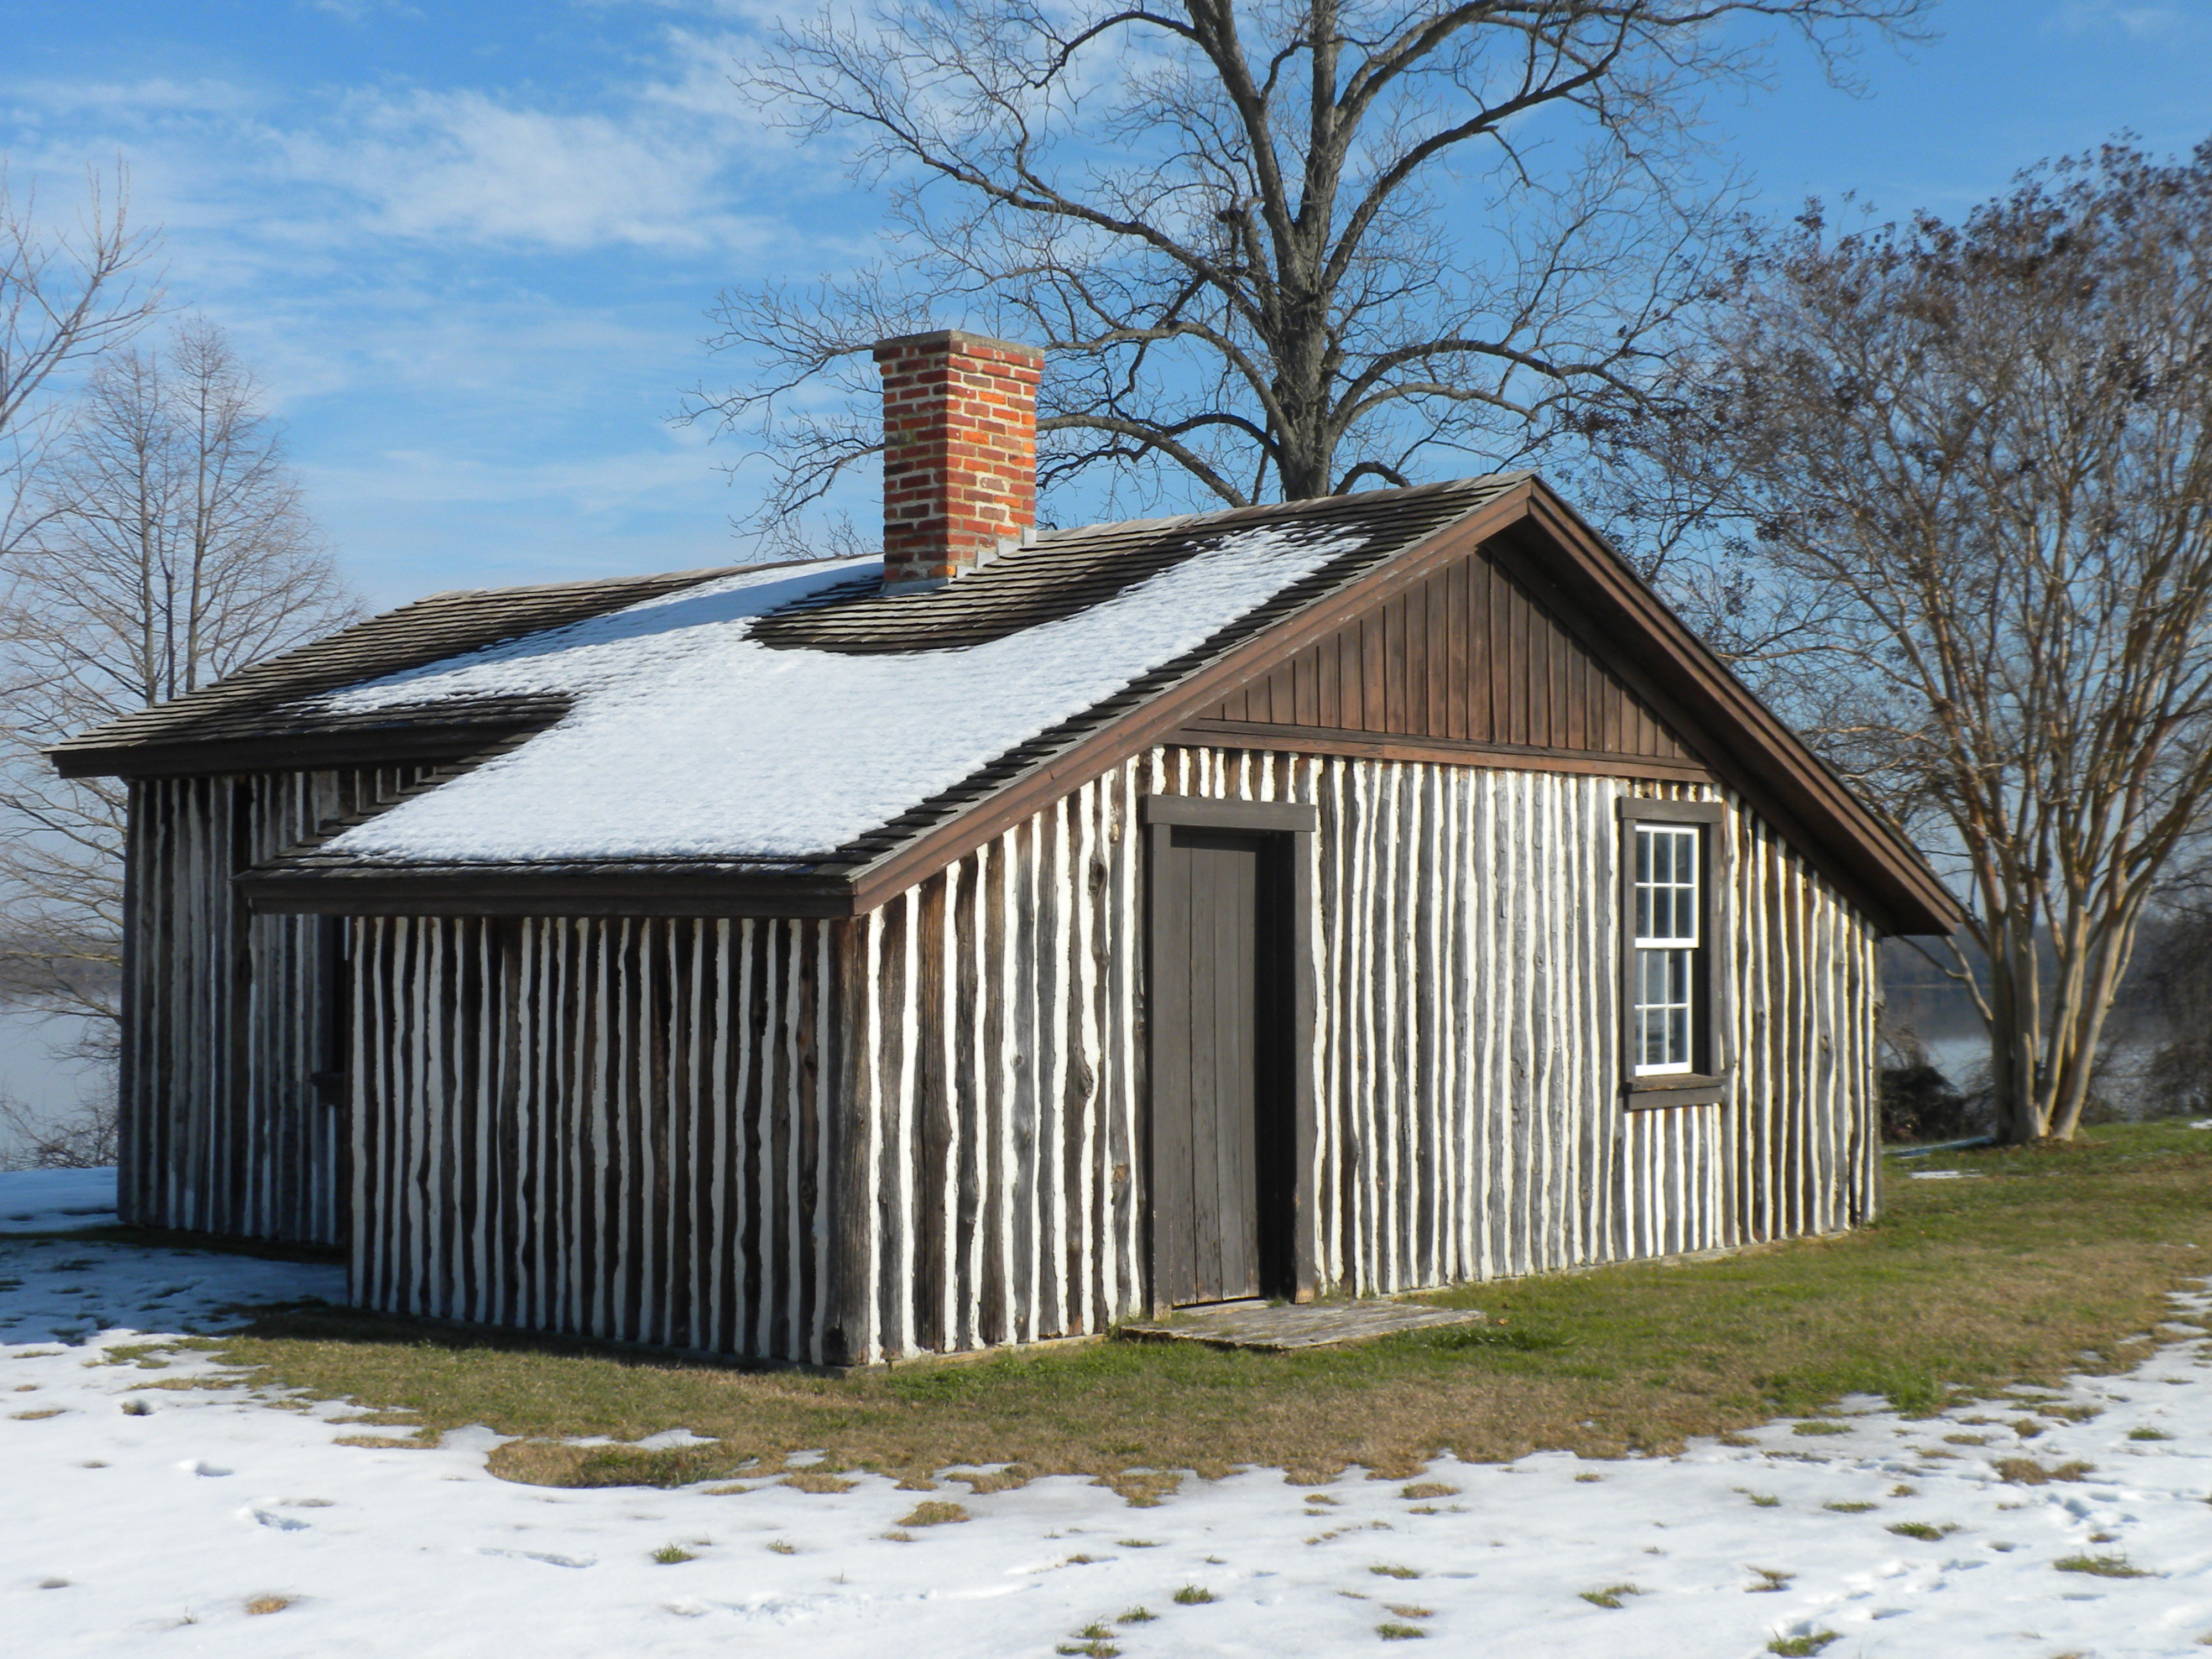 Cabin used by General Ulysses S. Grant during the Siege of Petersburg at City Point, Virginia.